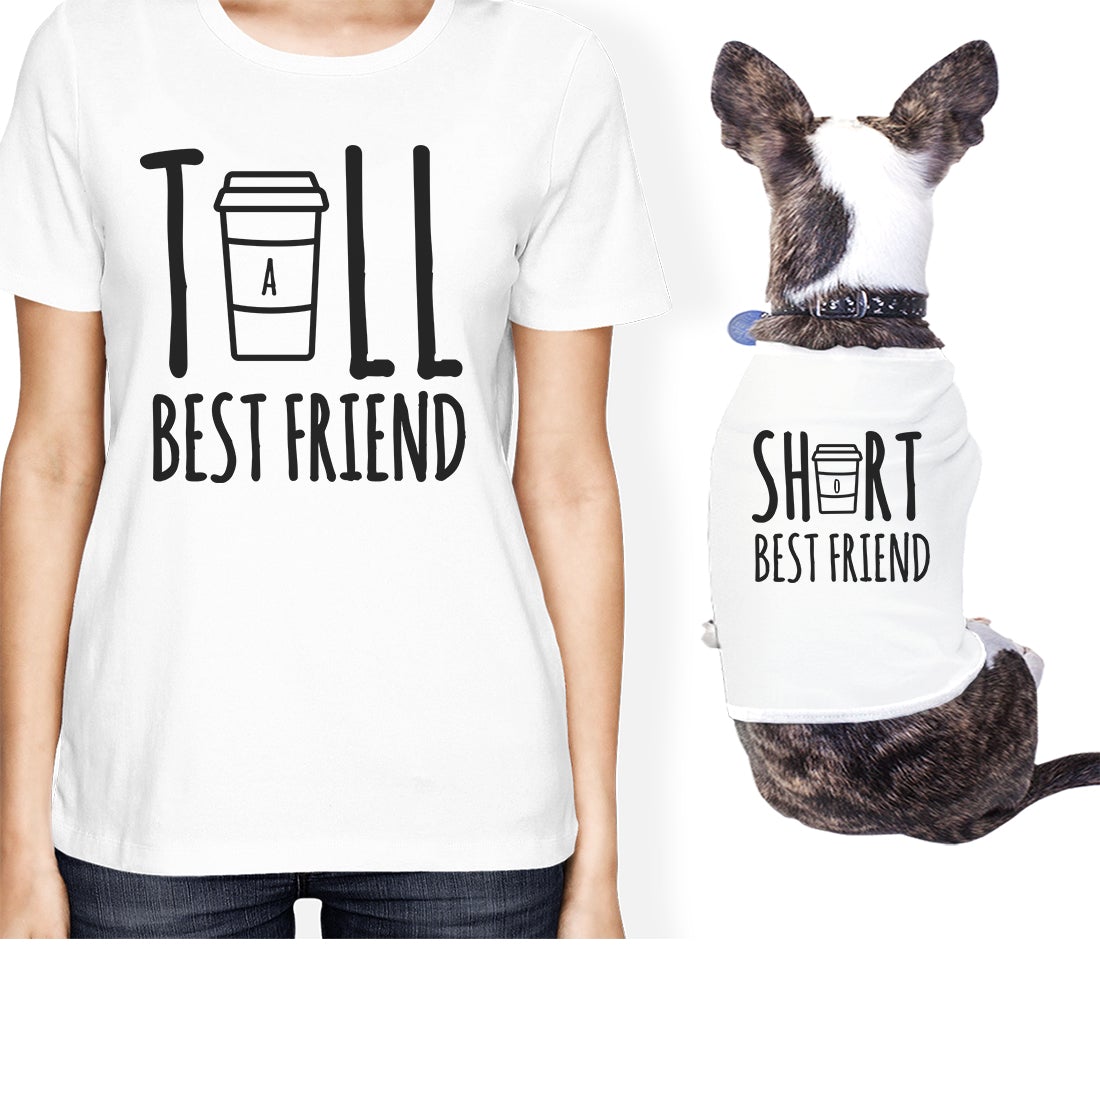 Tall Short Cup Small Pet Owner Matching Gift Outfits Womens Tshirts White